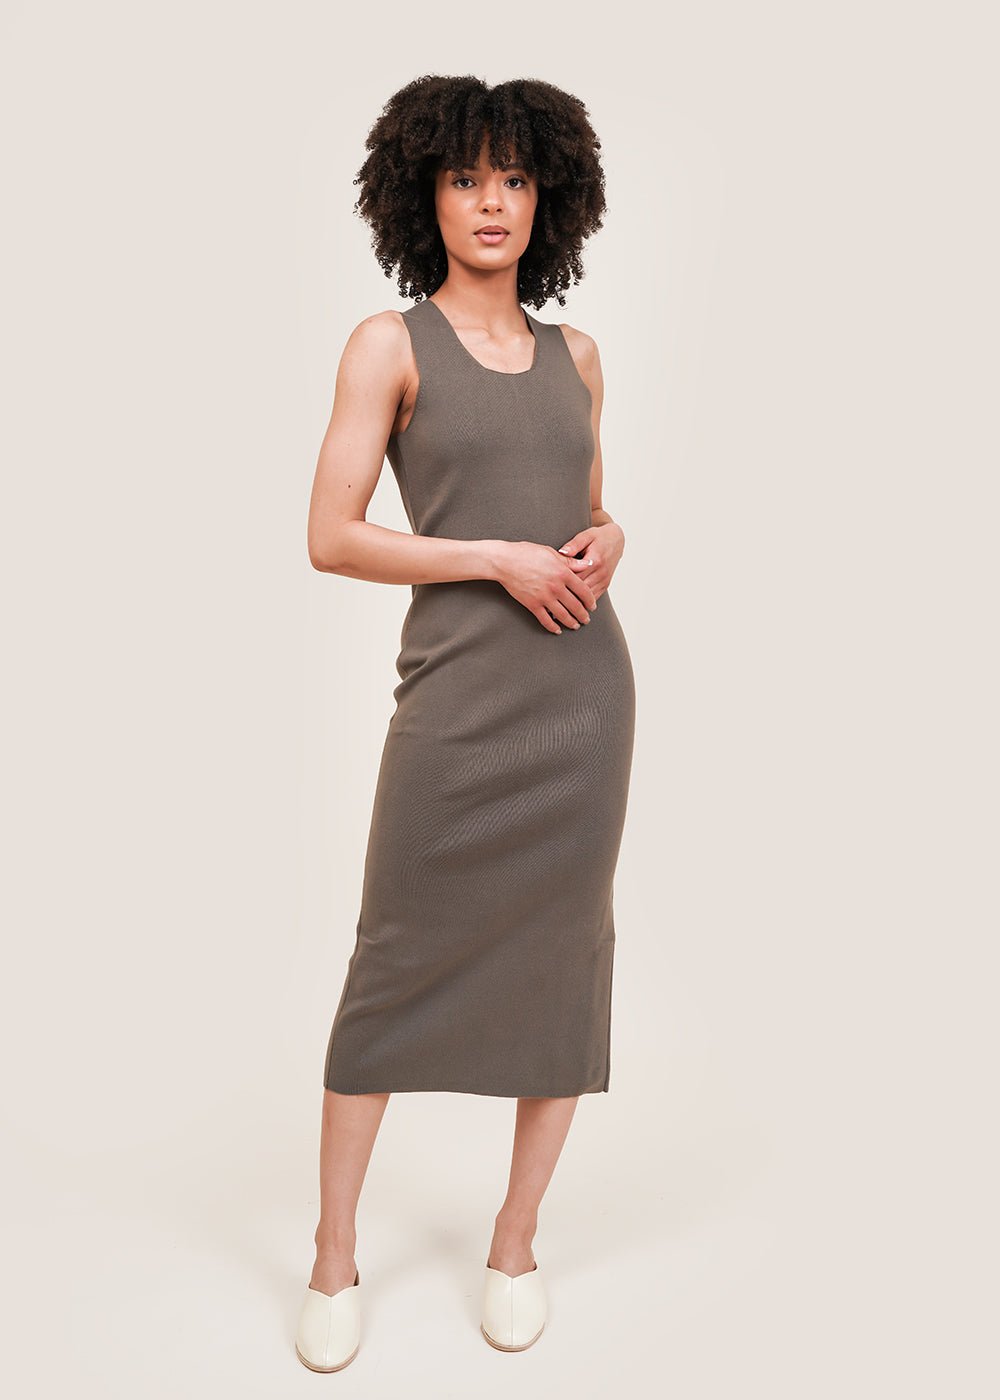 https://newclassics.ca/cdn/shop/products/lauren-manoogian-lead-stretch-tank-dress-new-classics-studios-sustainable-and-ethical-fashion-canada-285743_1000x.jpg?v=1687282075